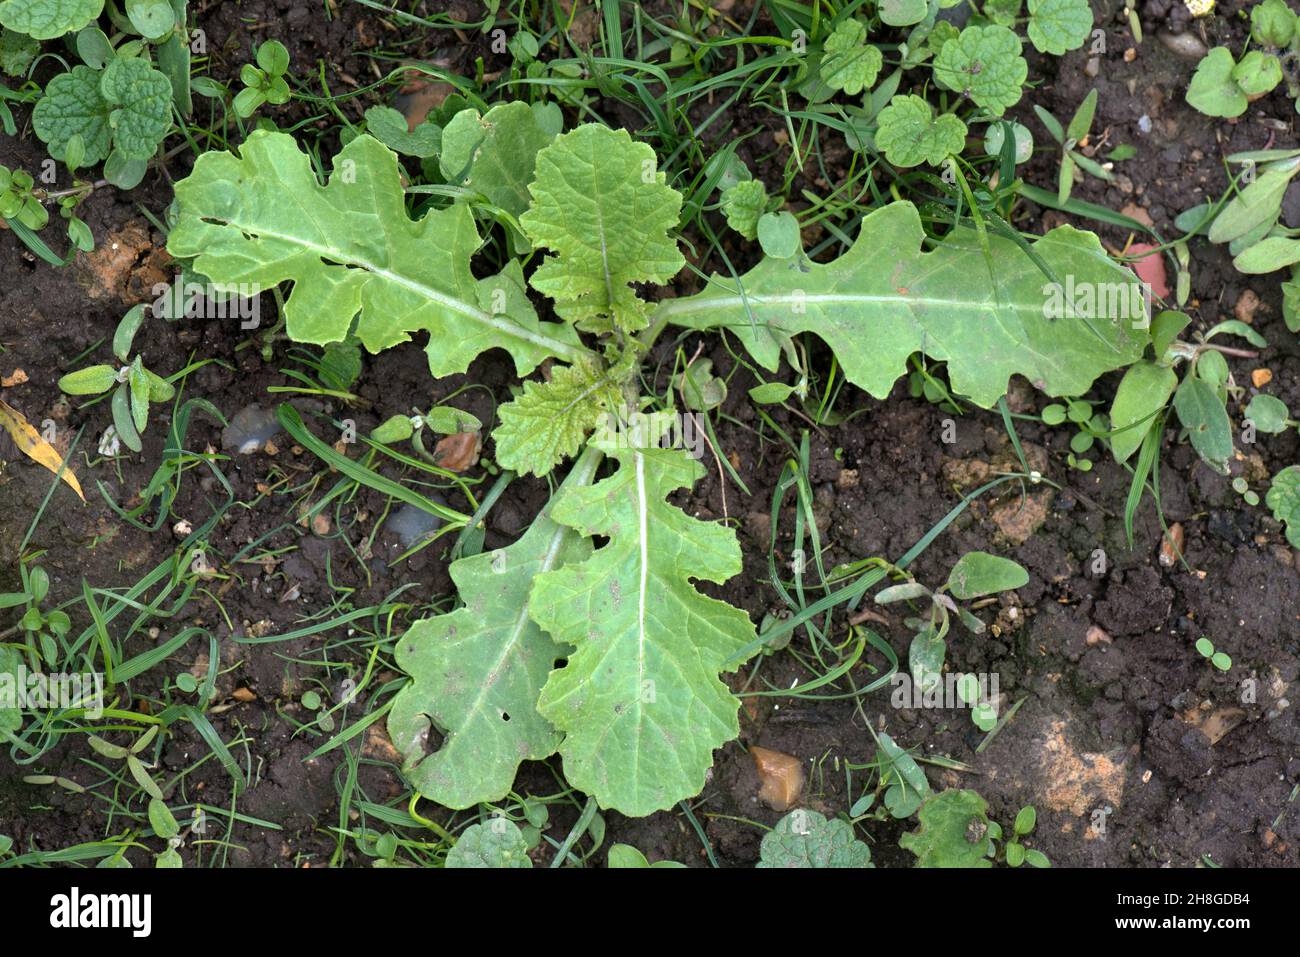 Rosette of true leaves of a charlock (Sinapis arvensis) seedling weed of garden and arable land, Berkshire, May Stock Photo